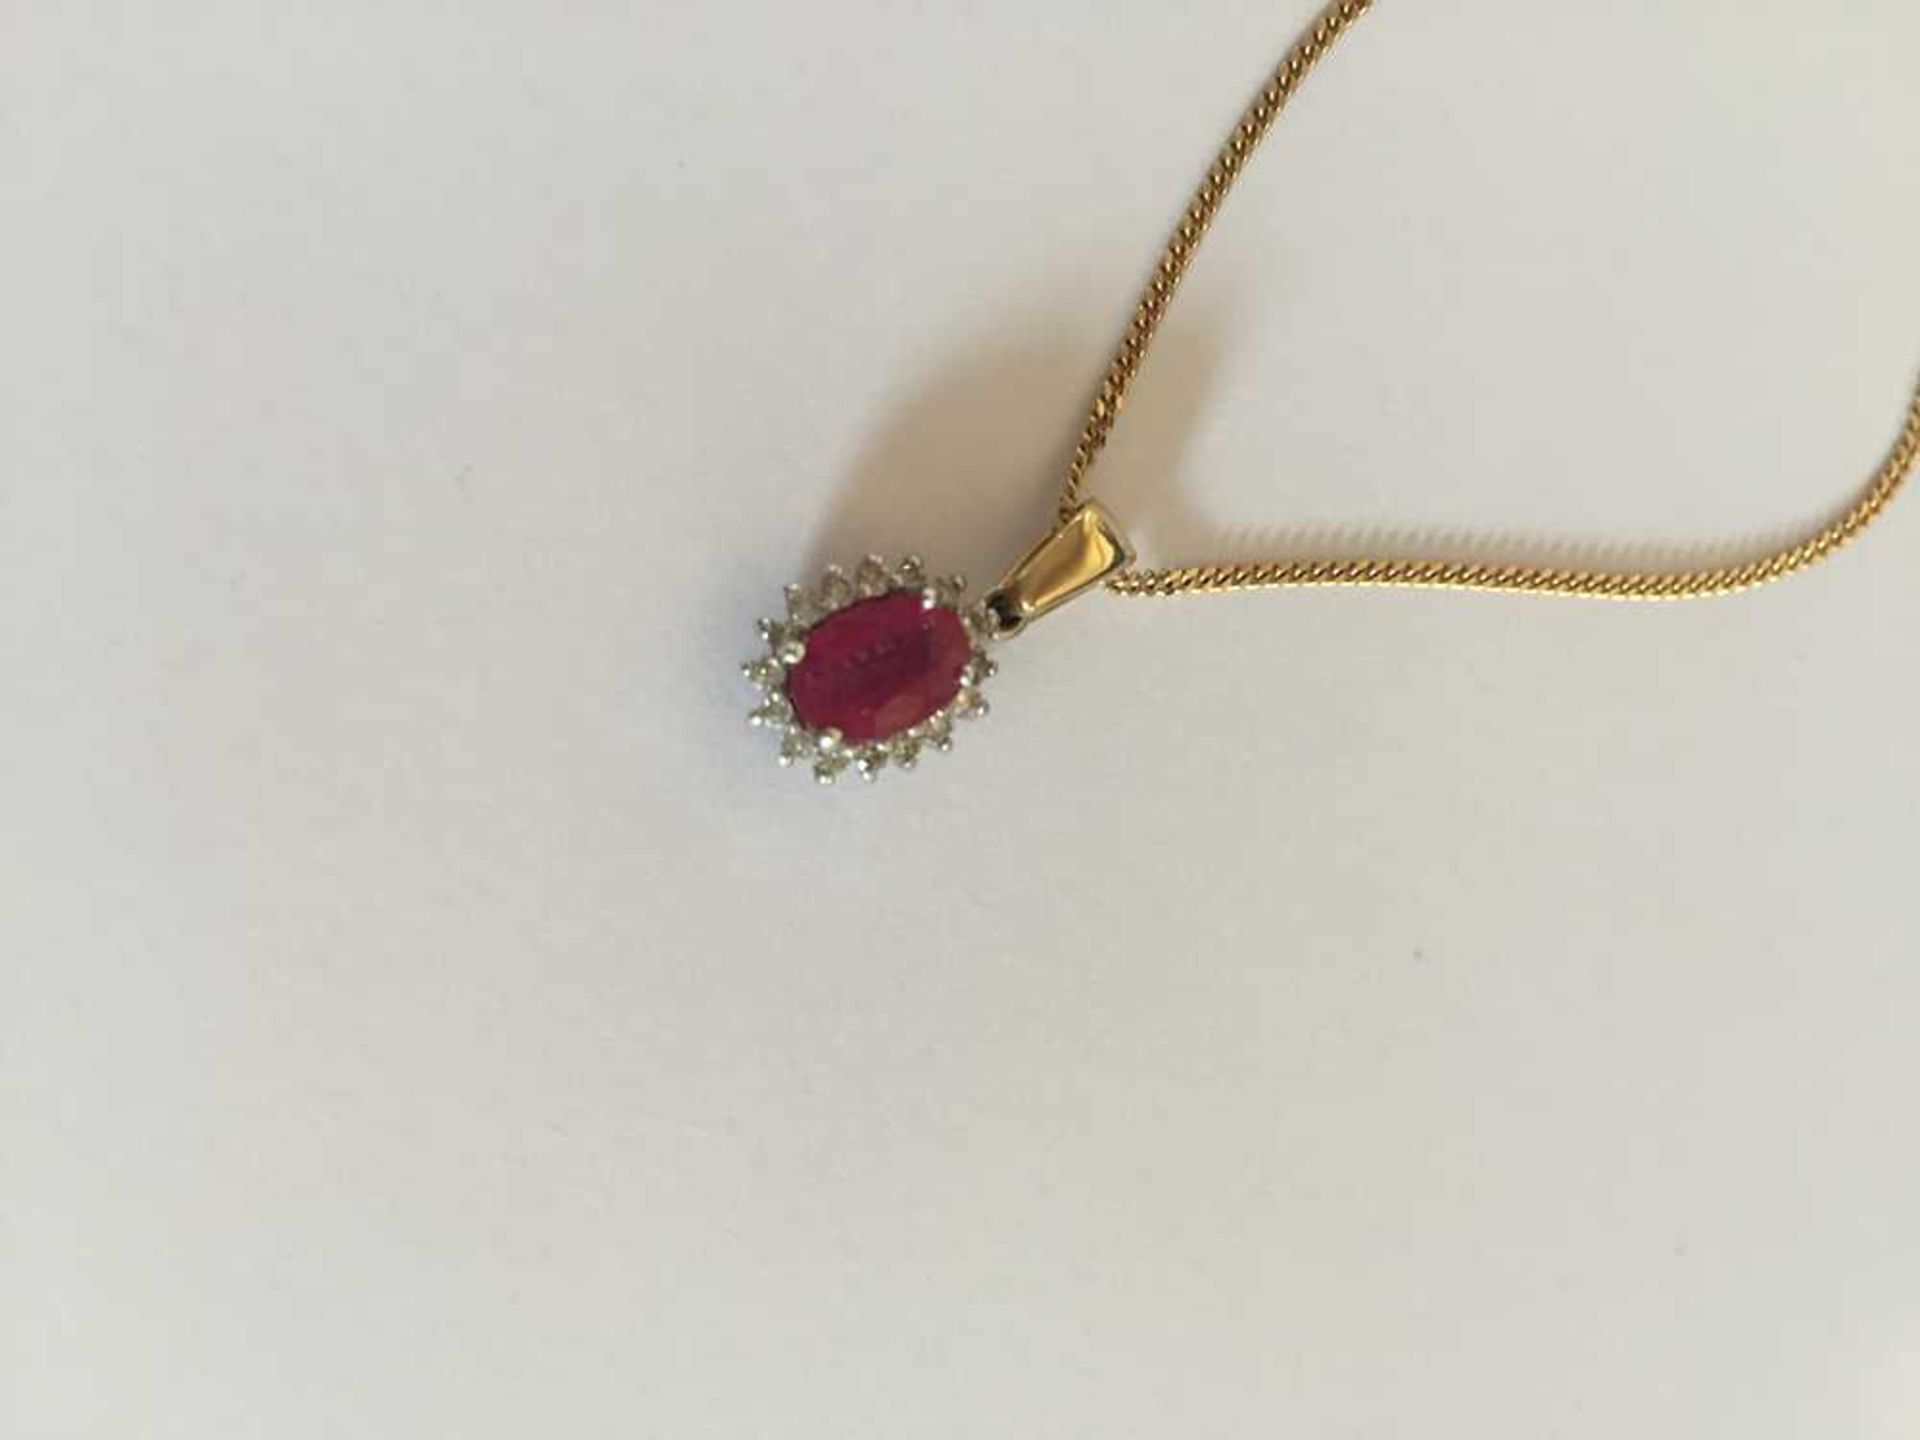 A pink sapphire and diamond pendant necklace - Image 8 of 17